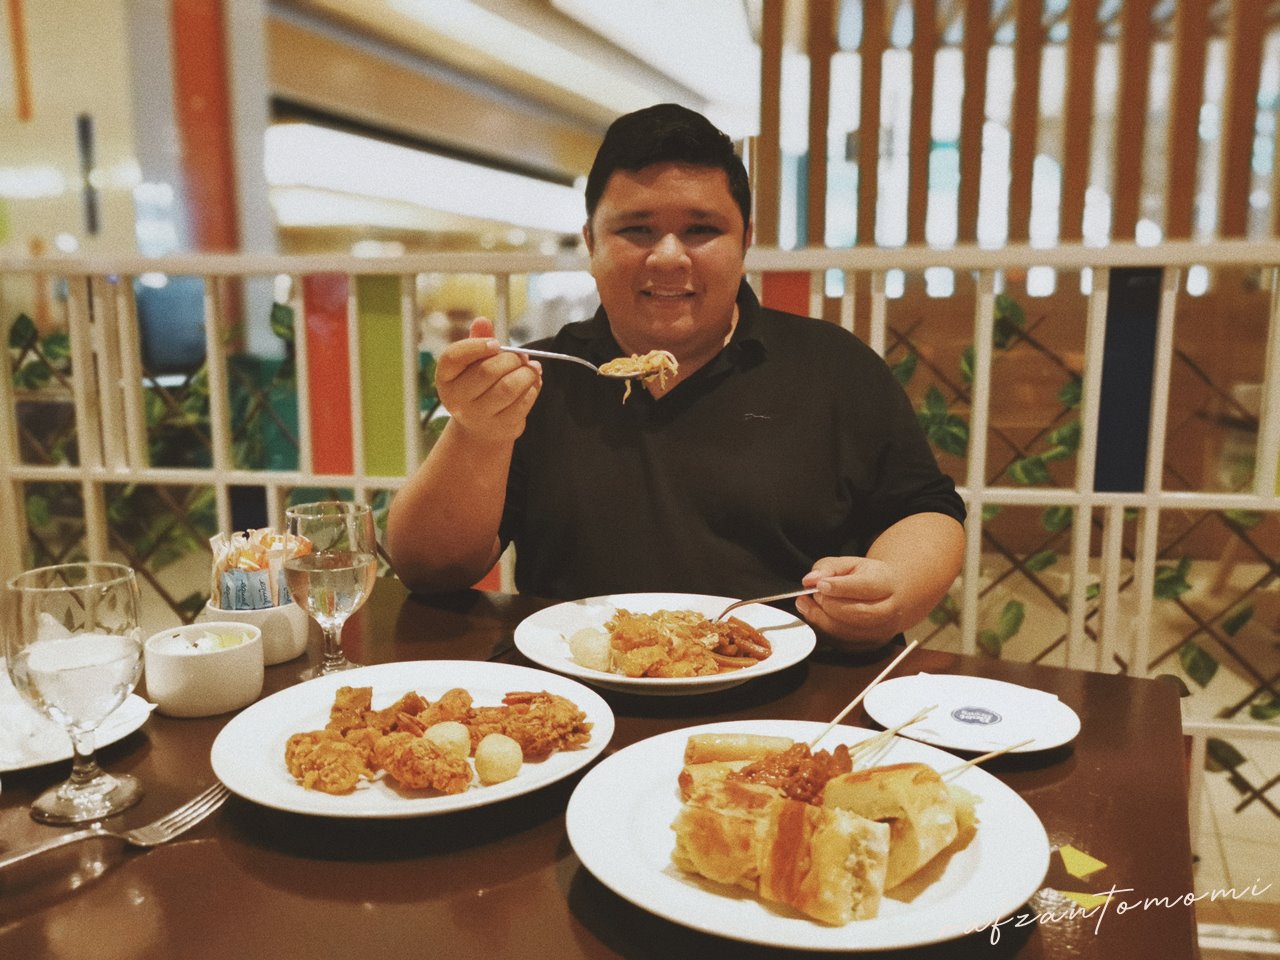 Bufet Ramadan 2021 - The Eatery Restaurant, Four Points by Sheraton Puchong